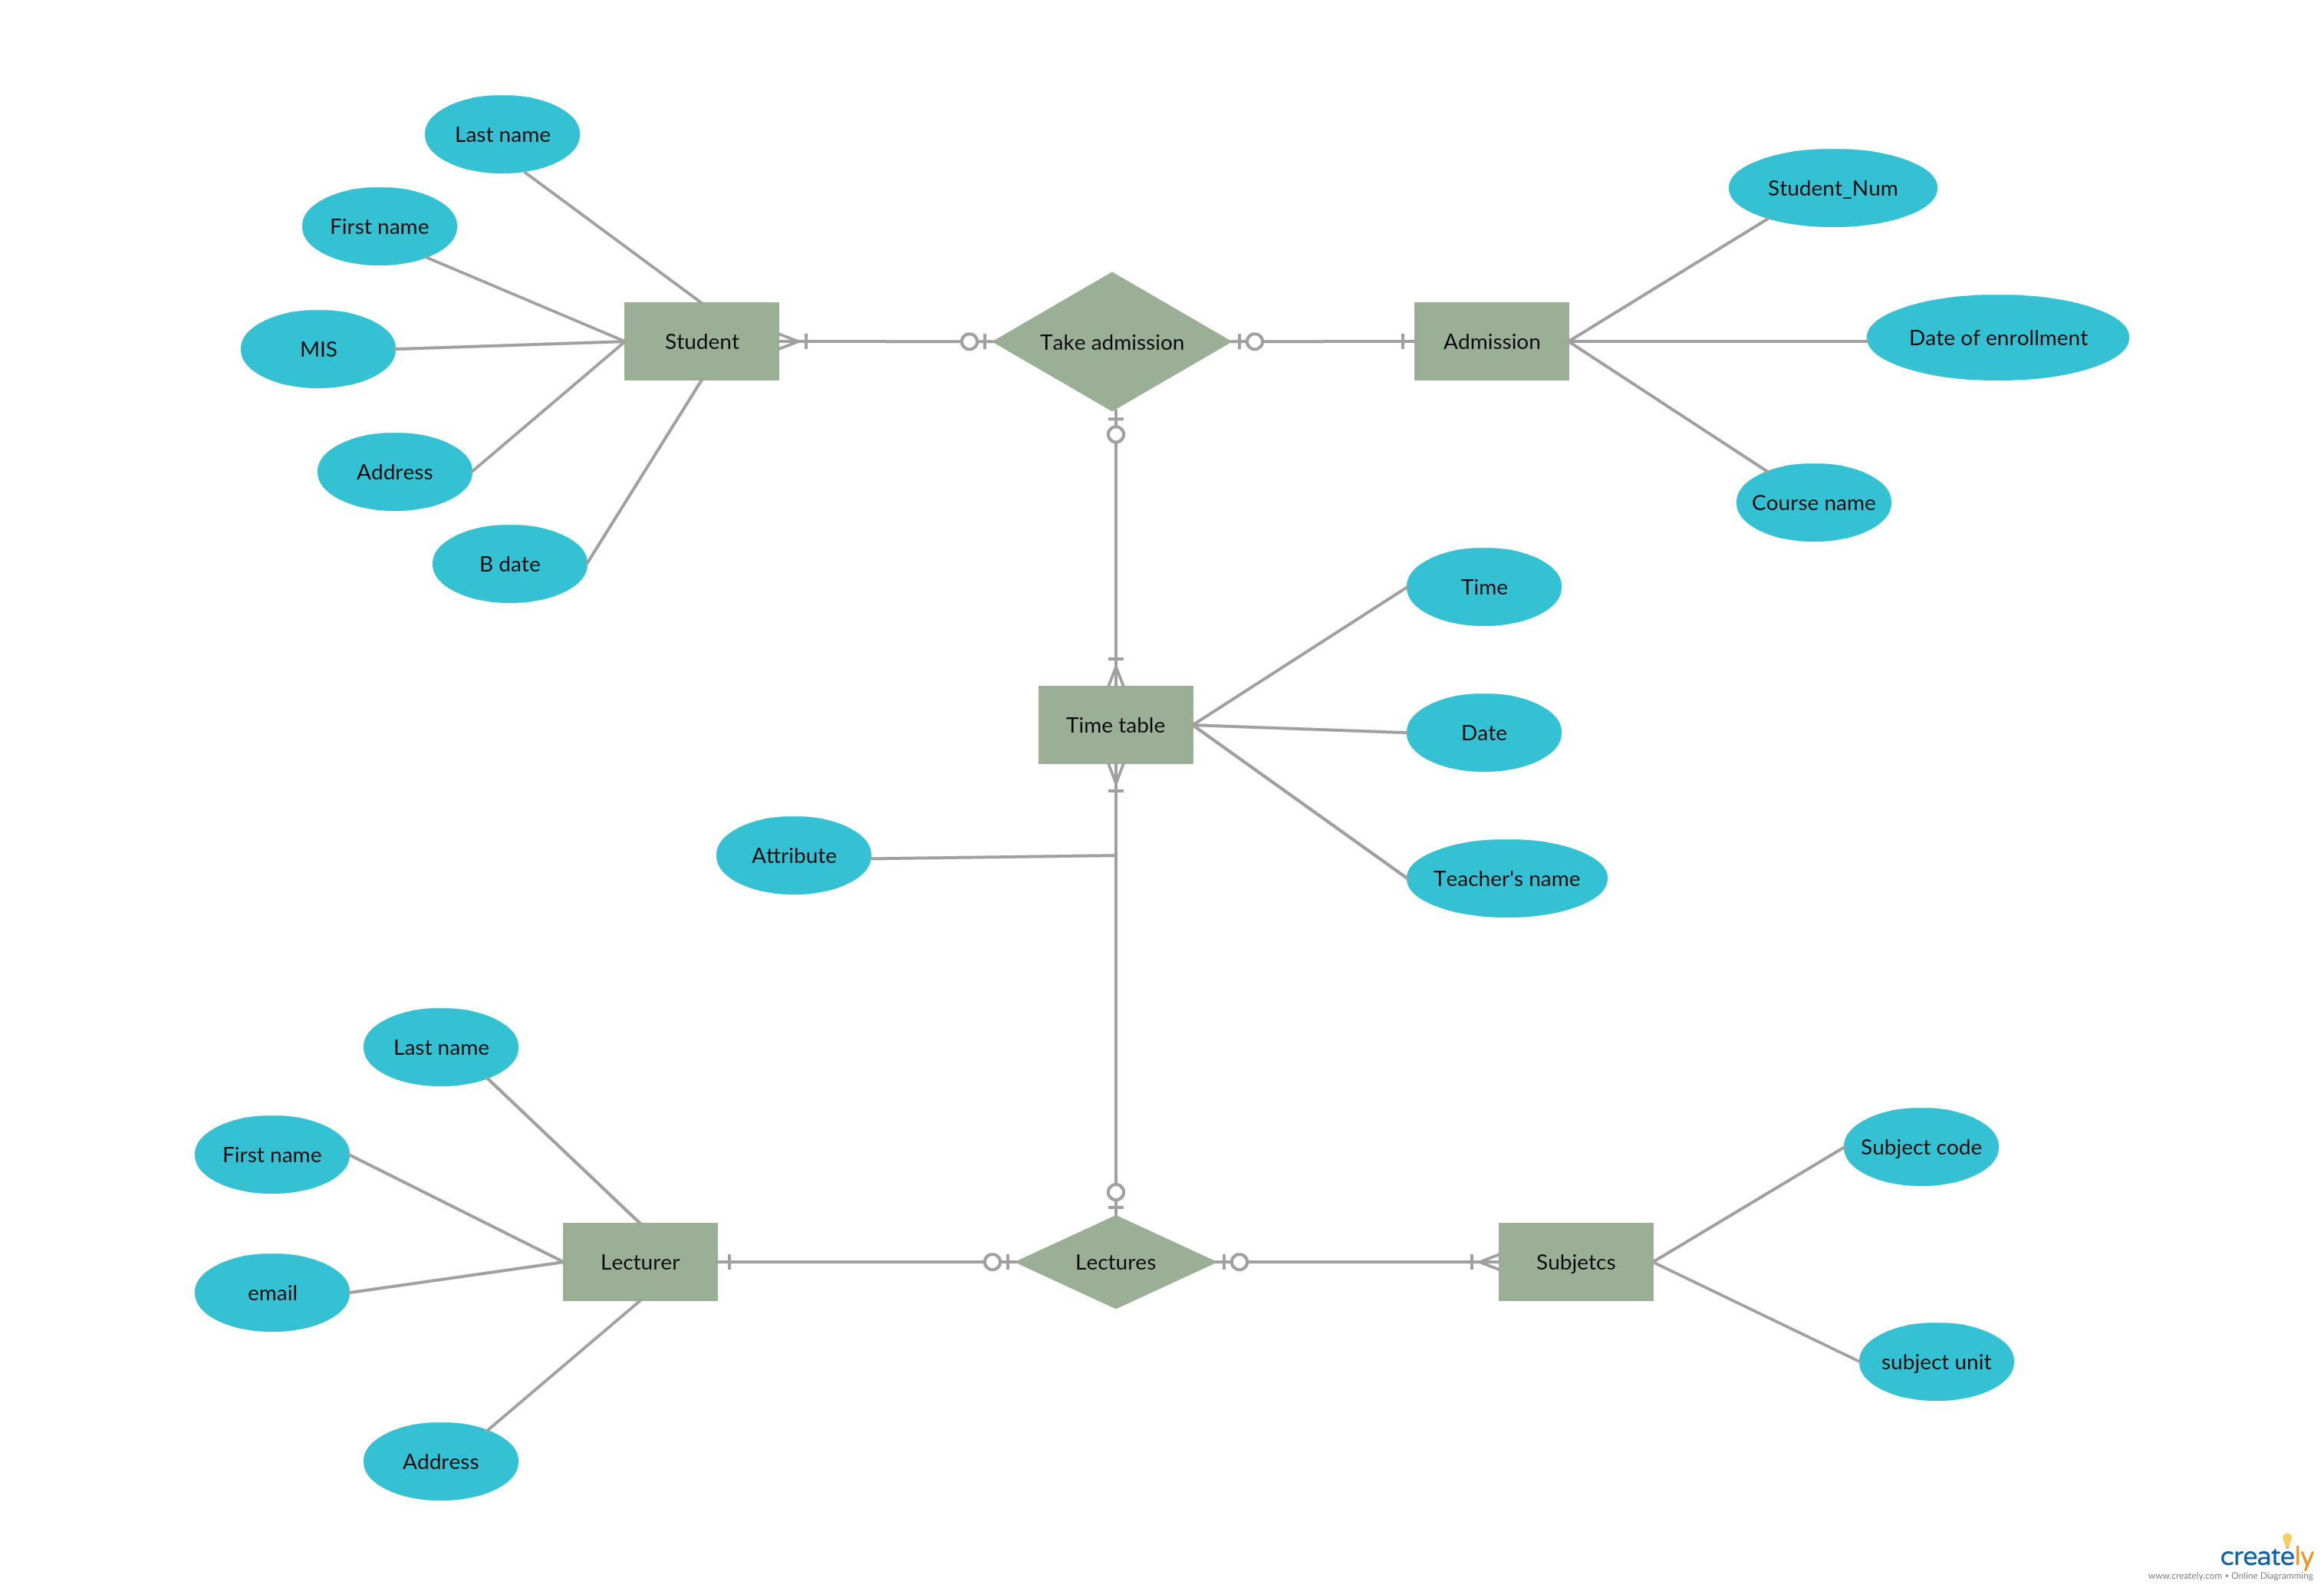 Er Diagram For College Management System Is A Visual within Entity Relationship Diagram Explanation